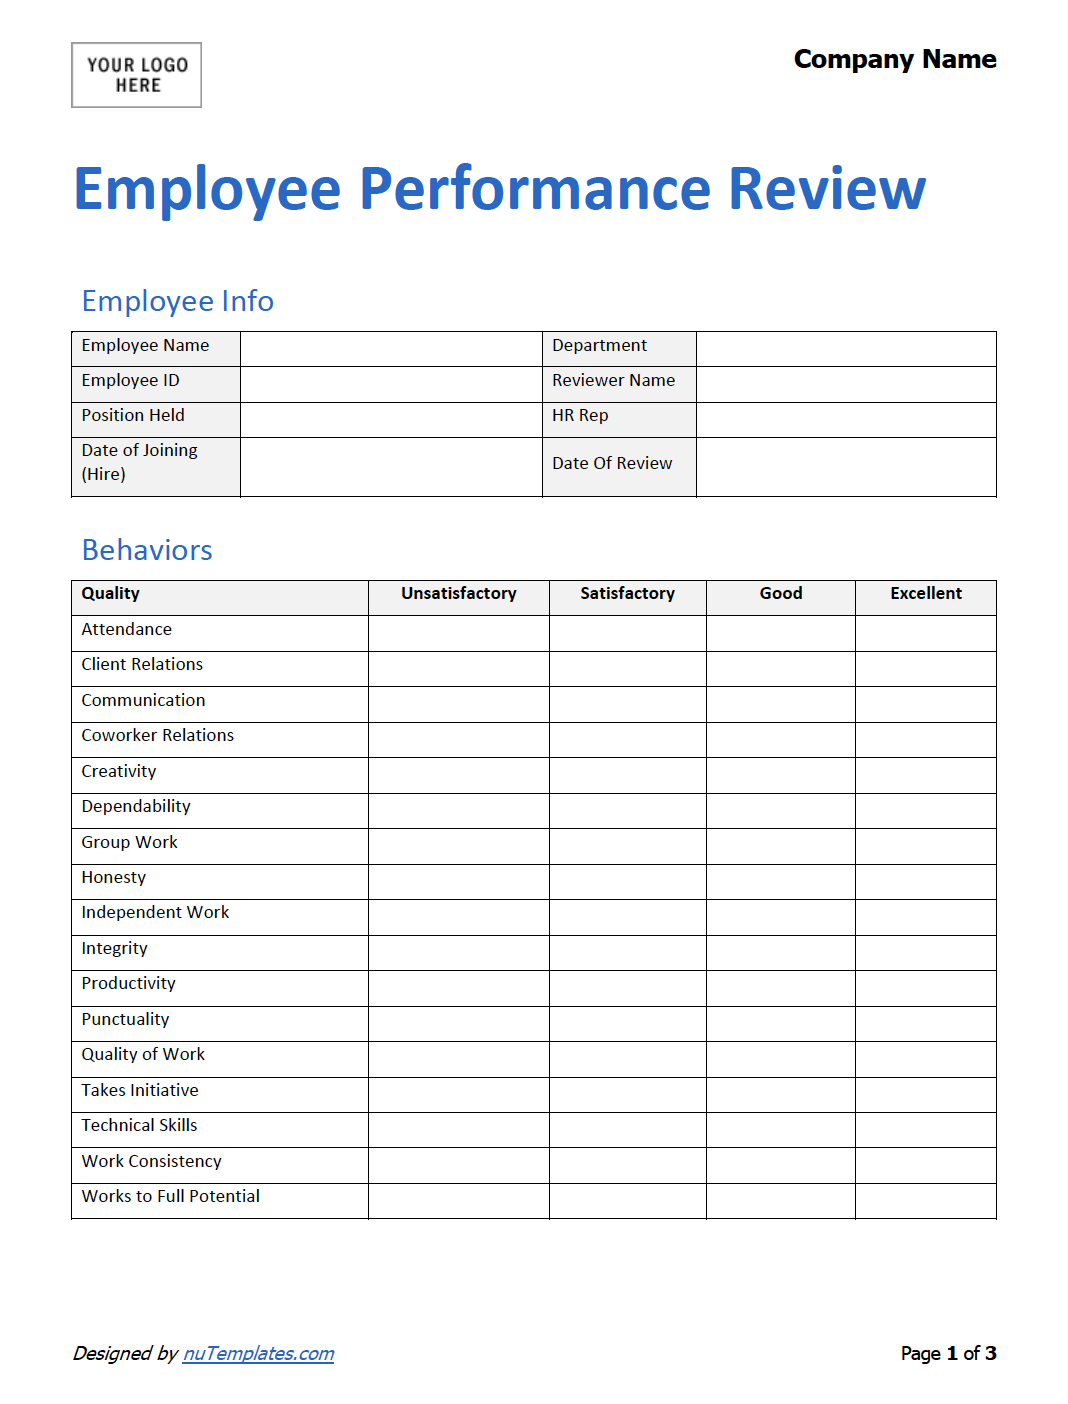 Employee Performance Review Template nuTemplates